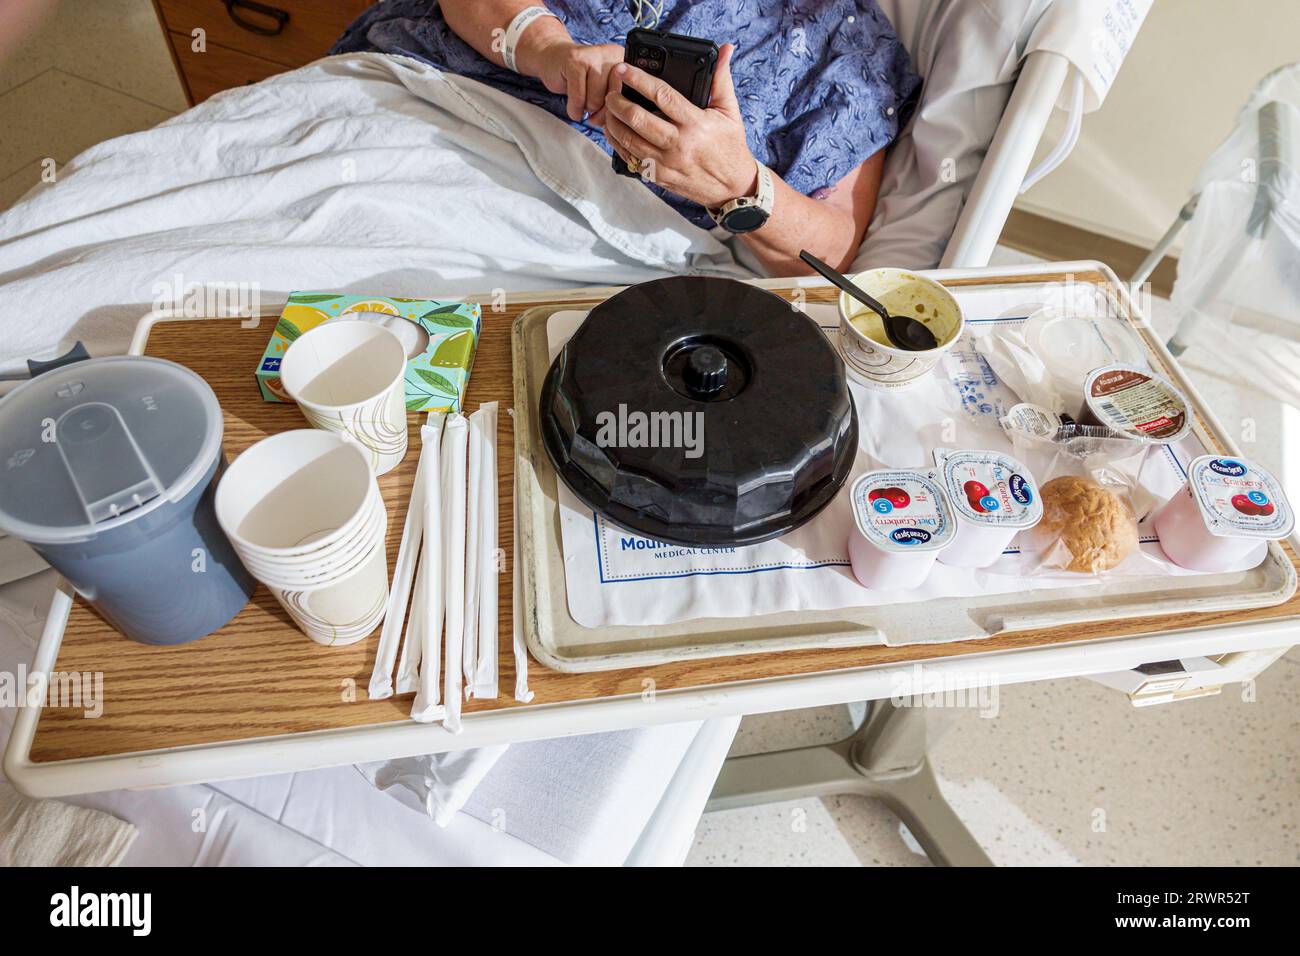 Miami Beach Florida,hospital patient room,bed table food meal lunch,woman women lady female,adult,using smartphone mobile cell phone,Hispanic Hispanic Stock Photo